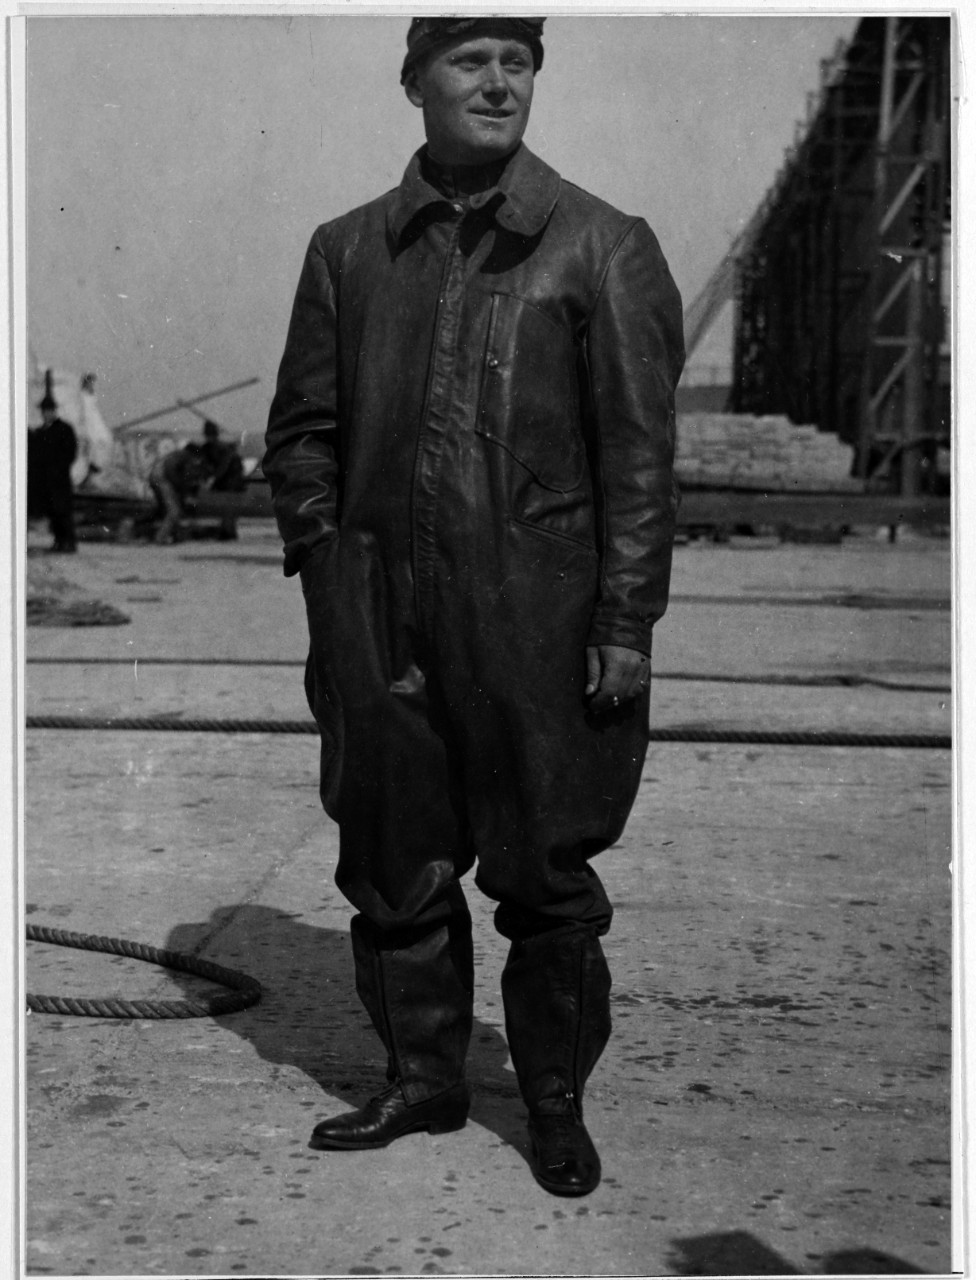 Lieutenant David H. McCulloch, USN Reserve Flying Corps